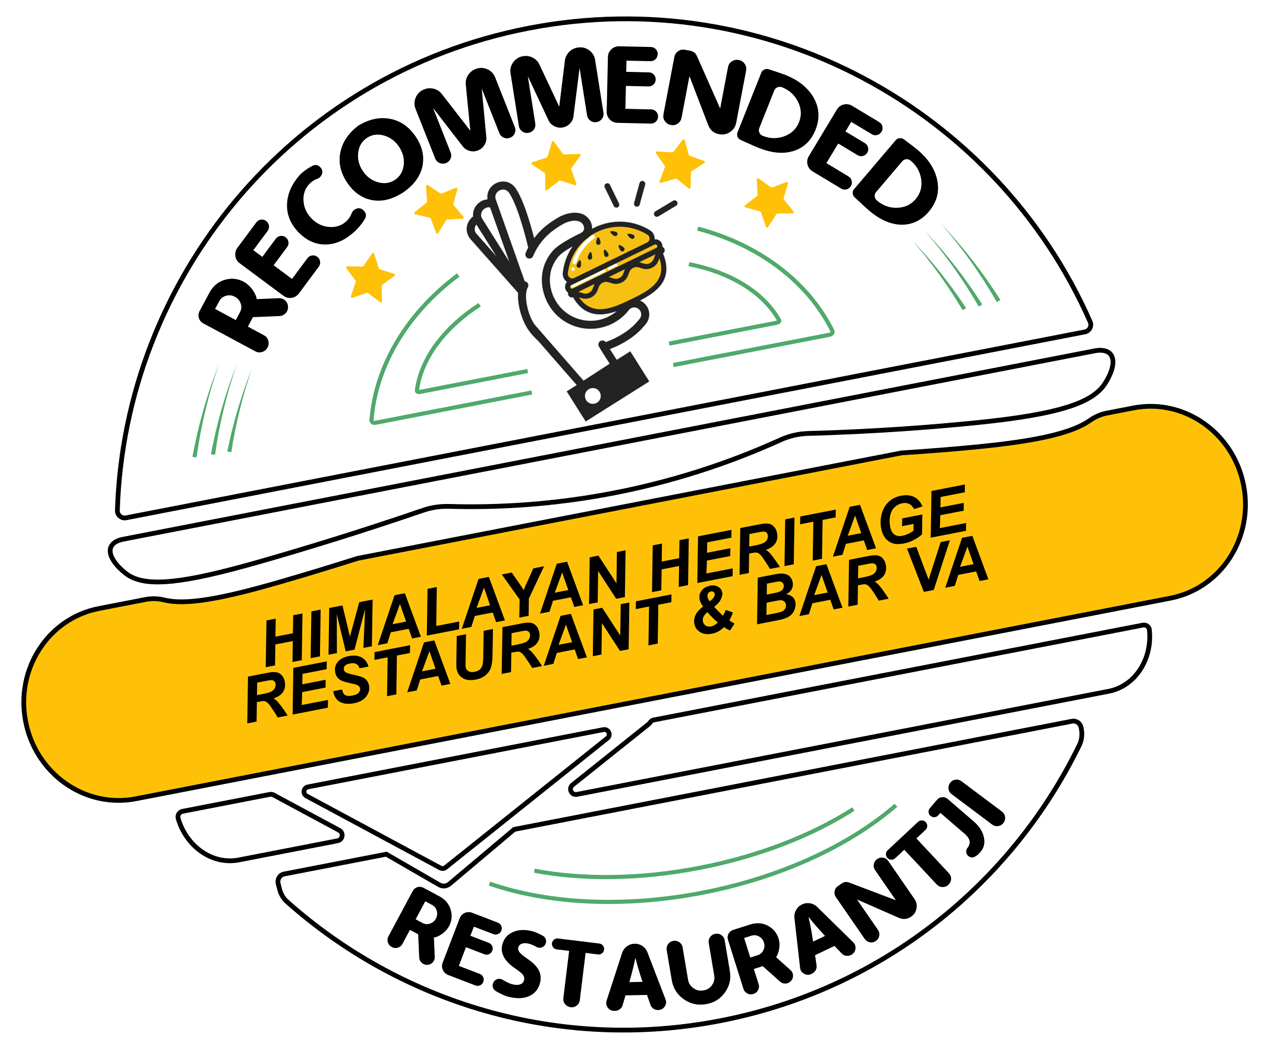 Himalayan Heritage Restaurant & Bar VA is a must-visit according to Restaurantji - a comprehensive dining guide for the best places to eat nearby.